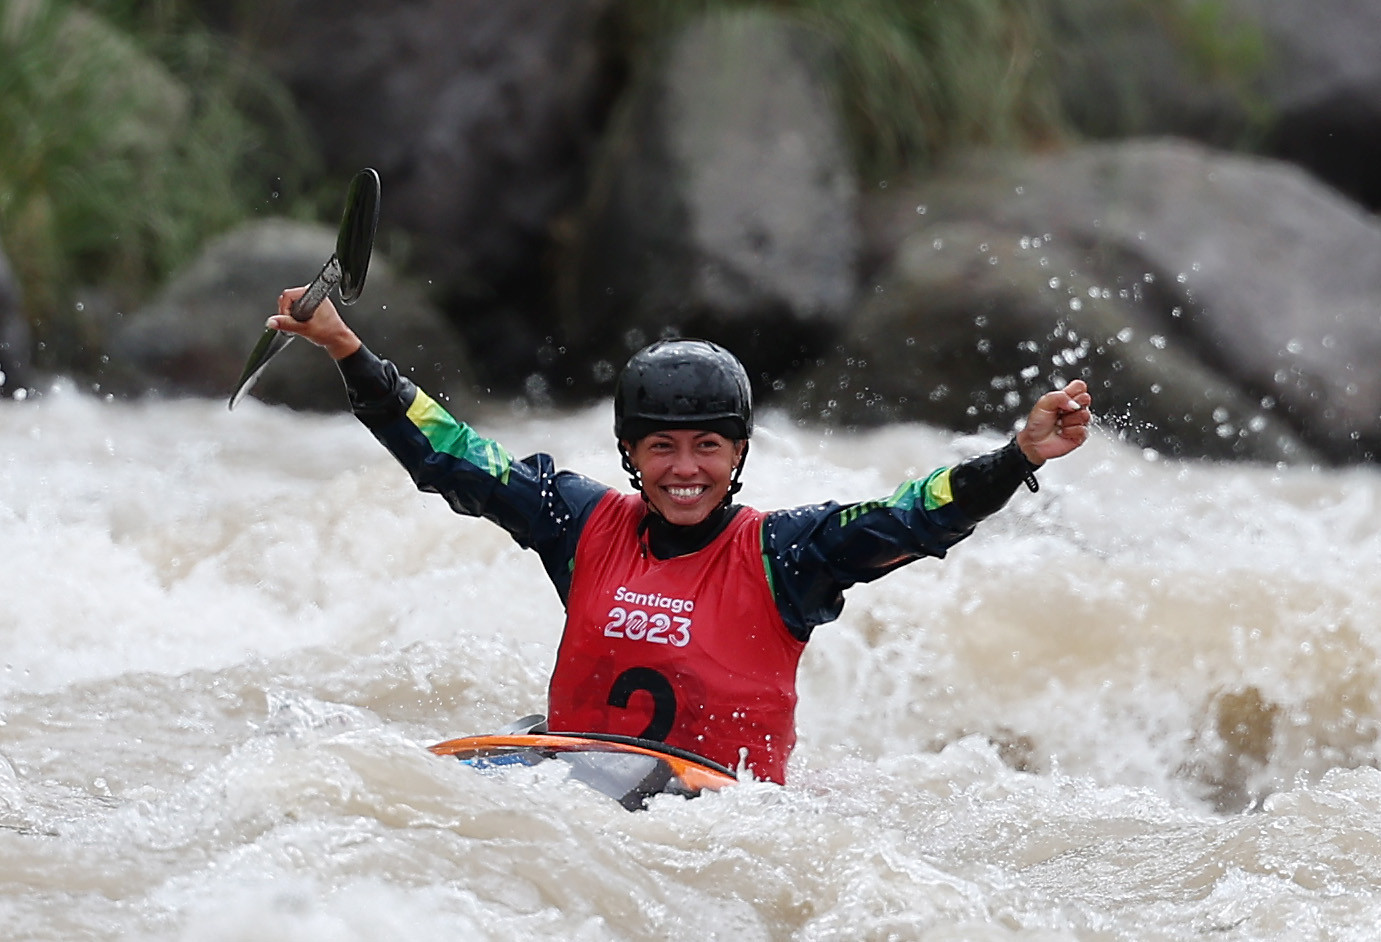 It was another successful day at Santiago 2023 for Brazil, including a women's canoe and kayak cross double in canoe slalom for Ana Sátila ©Getty Images